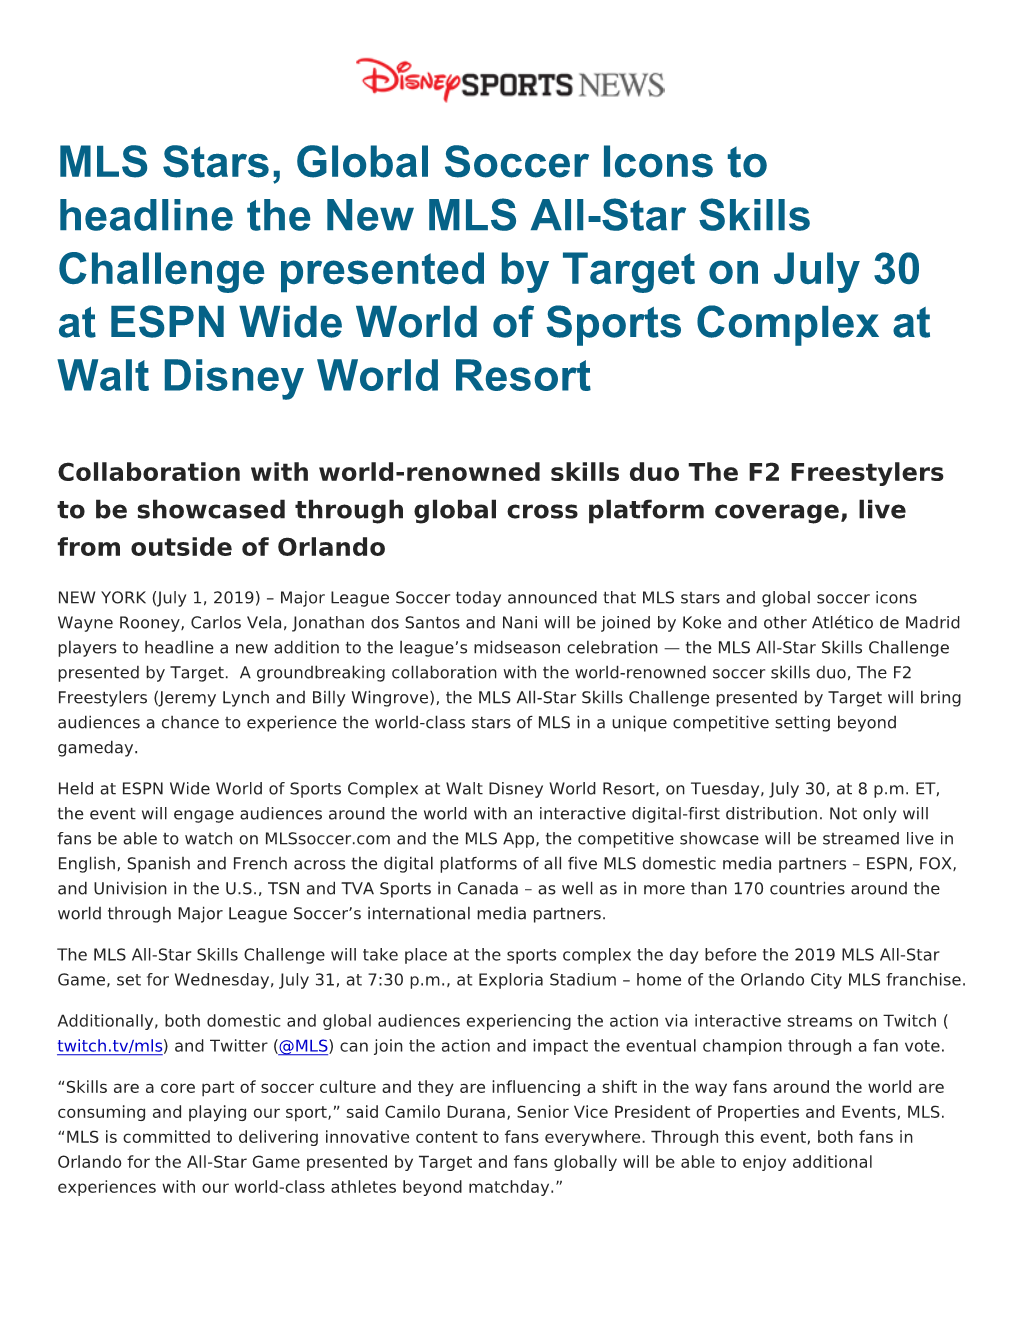 MLS Stars, Global Soccer Icons to Headline the New MLS All-Star